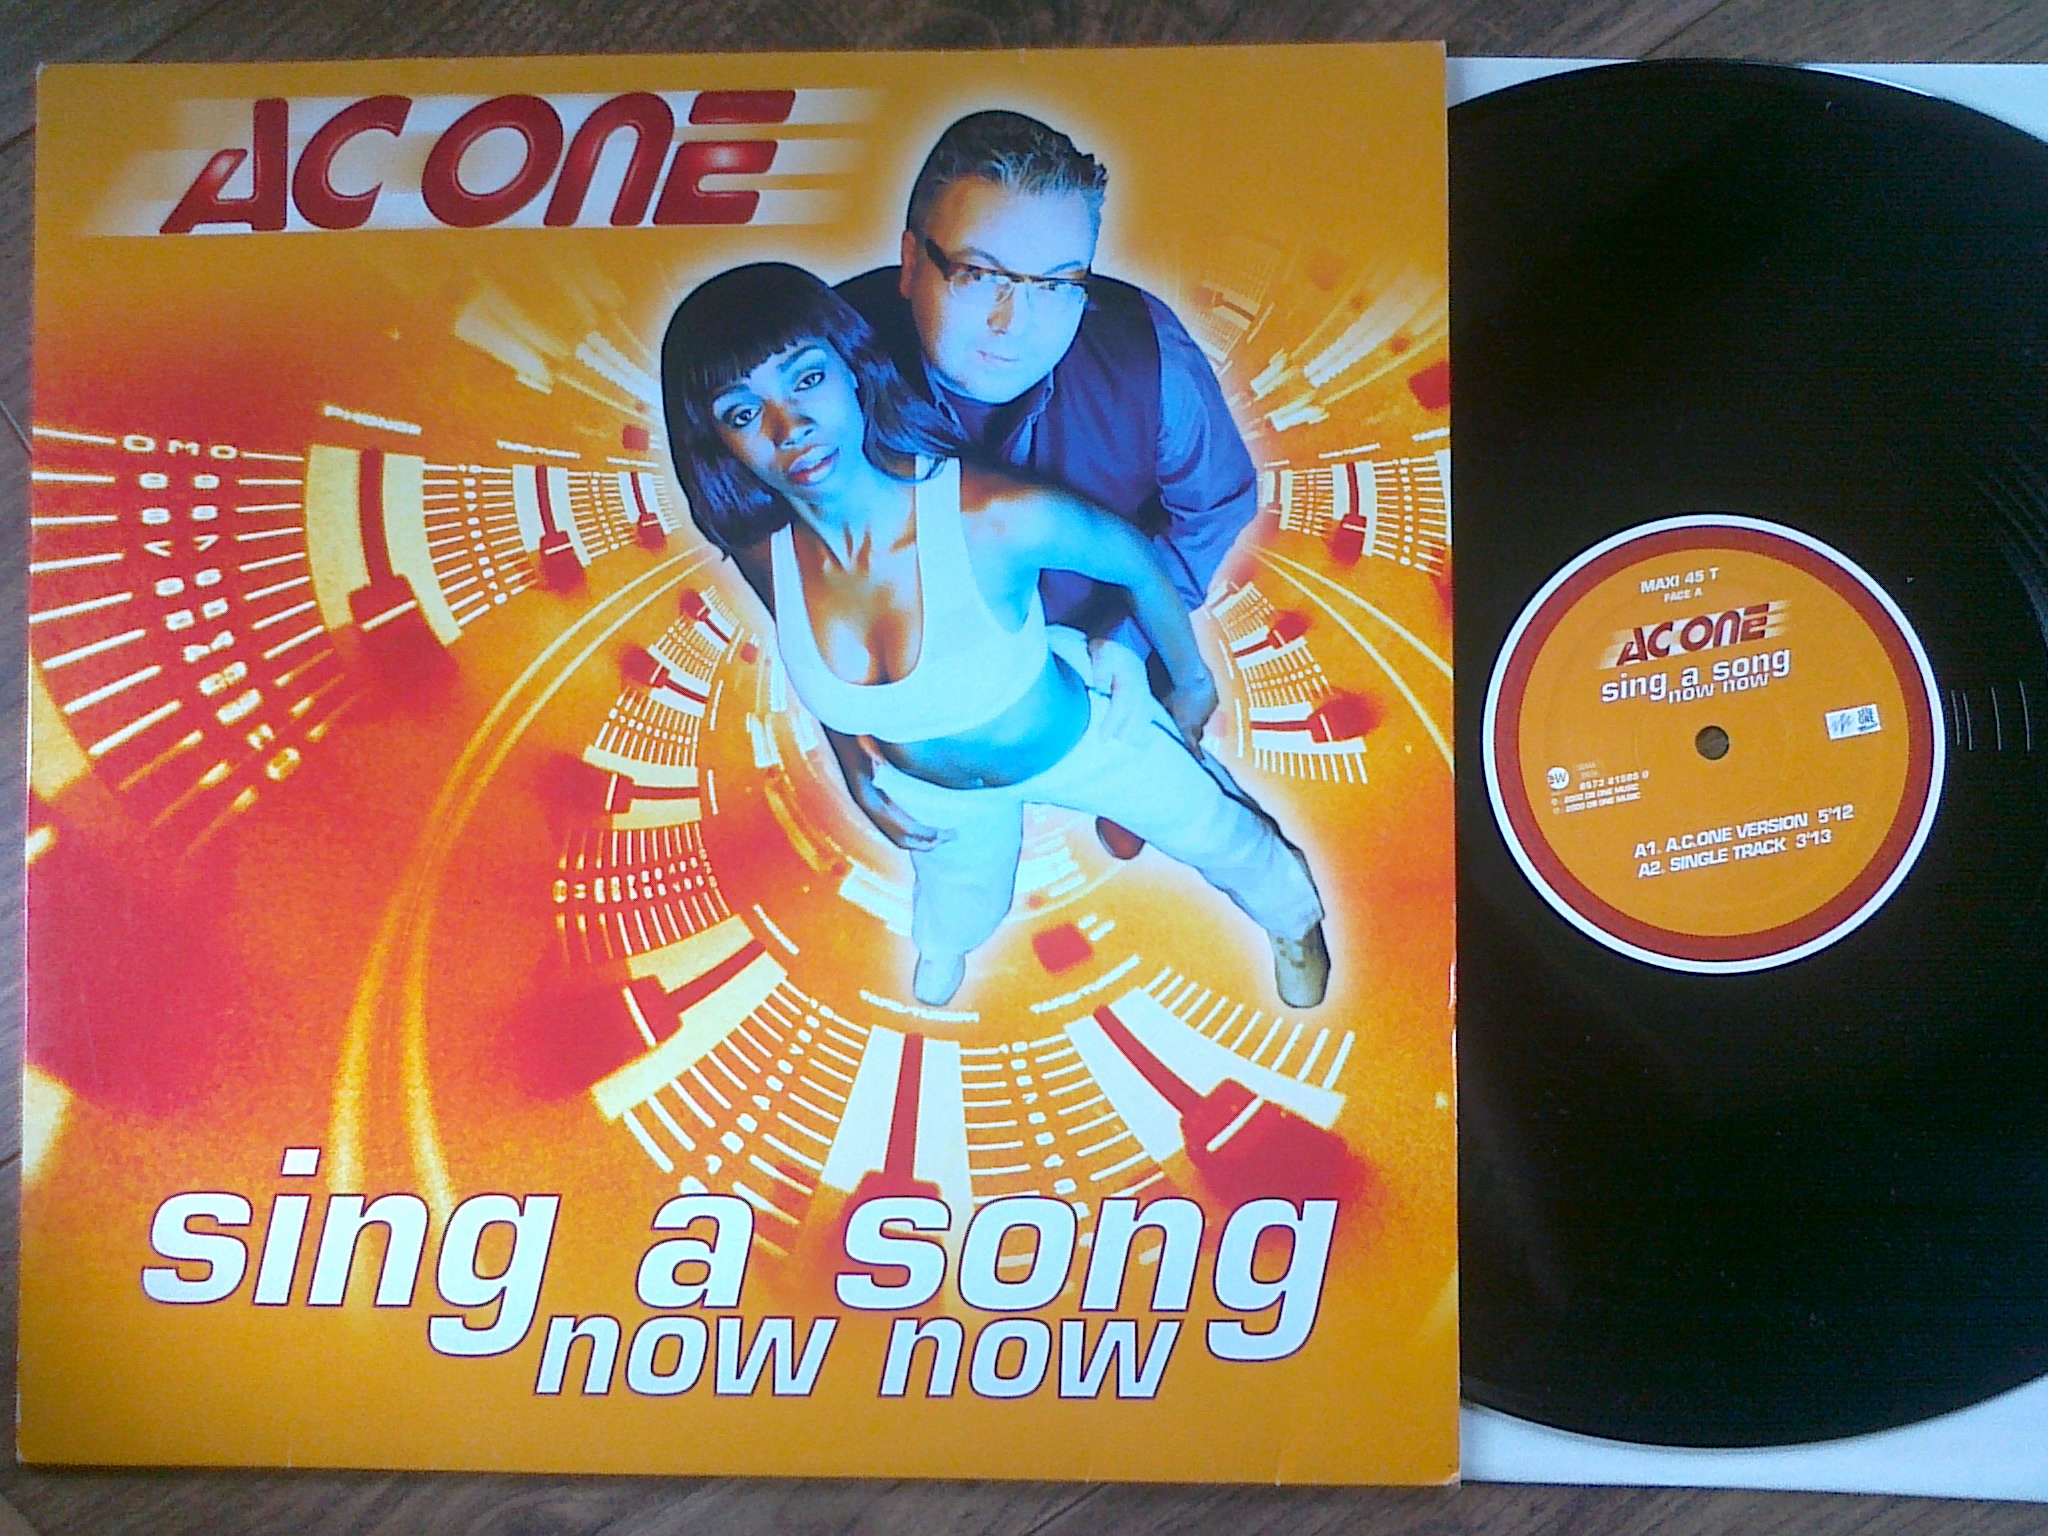 AC One - Sing a song